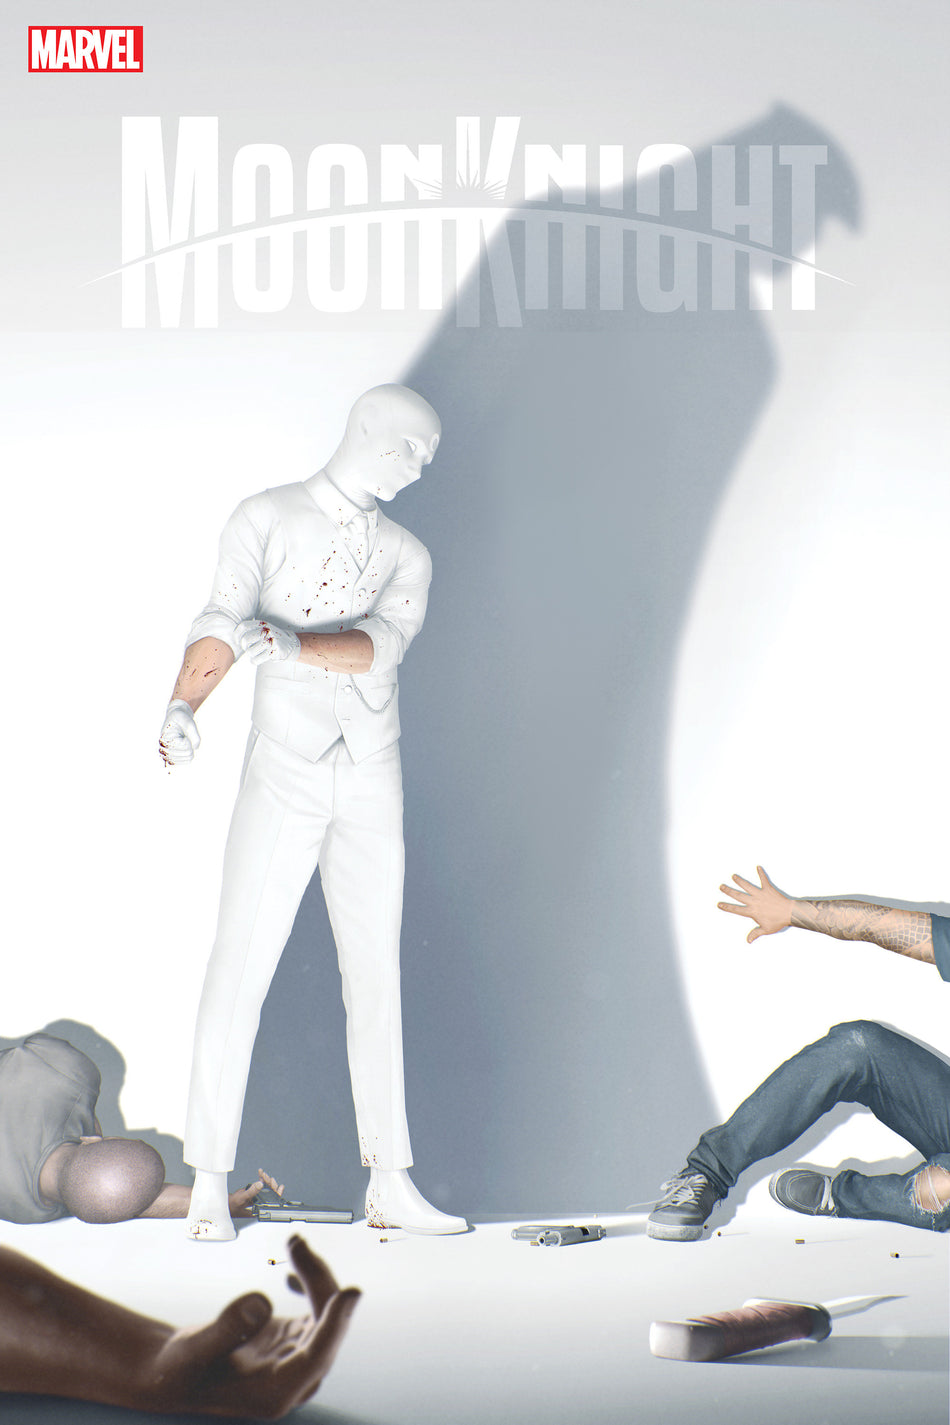 Image of Moon Knight 7 Rahzzah Variant comic sold by Stronghold Collectibles.